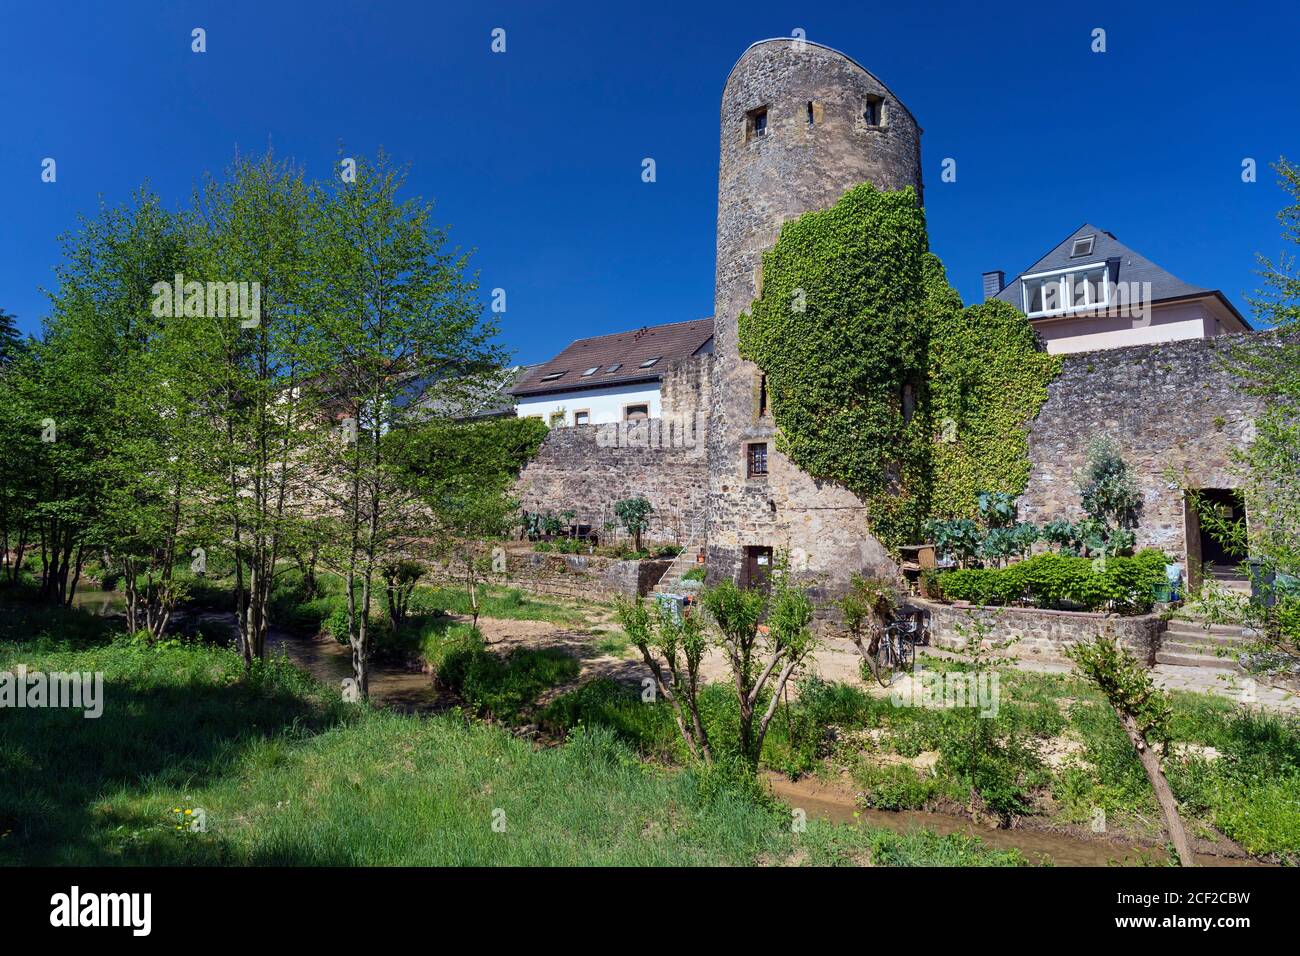 Europe, Luxembourg, Echternach, Ruins of ancient City Walls from Rue des Benedictins. Stock Photo